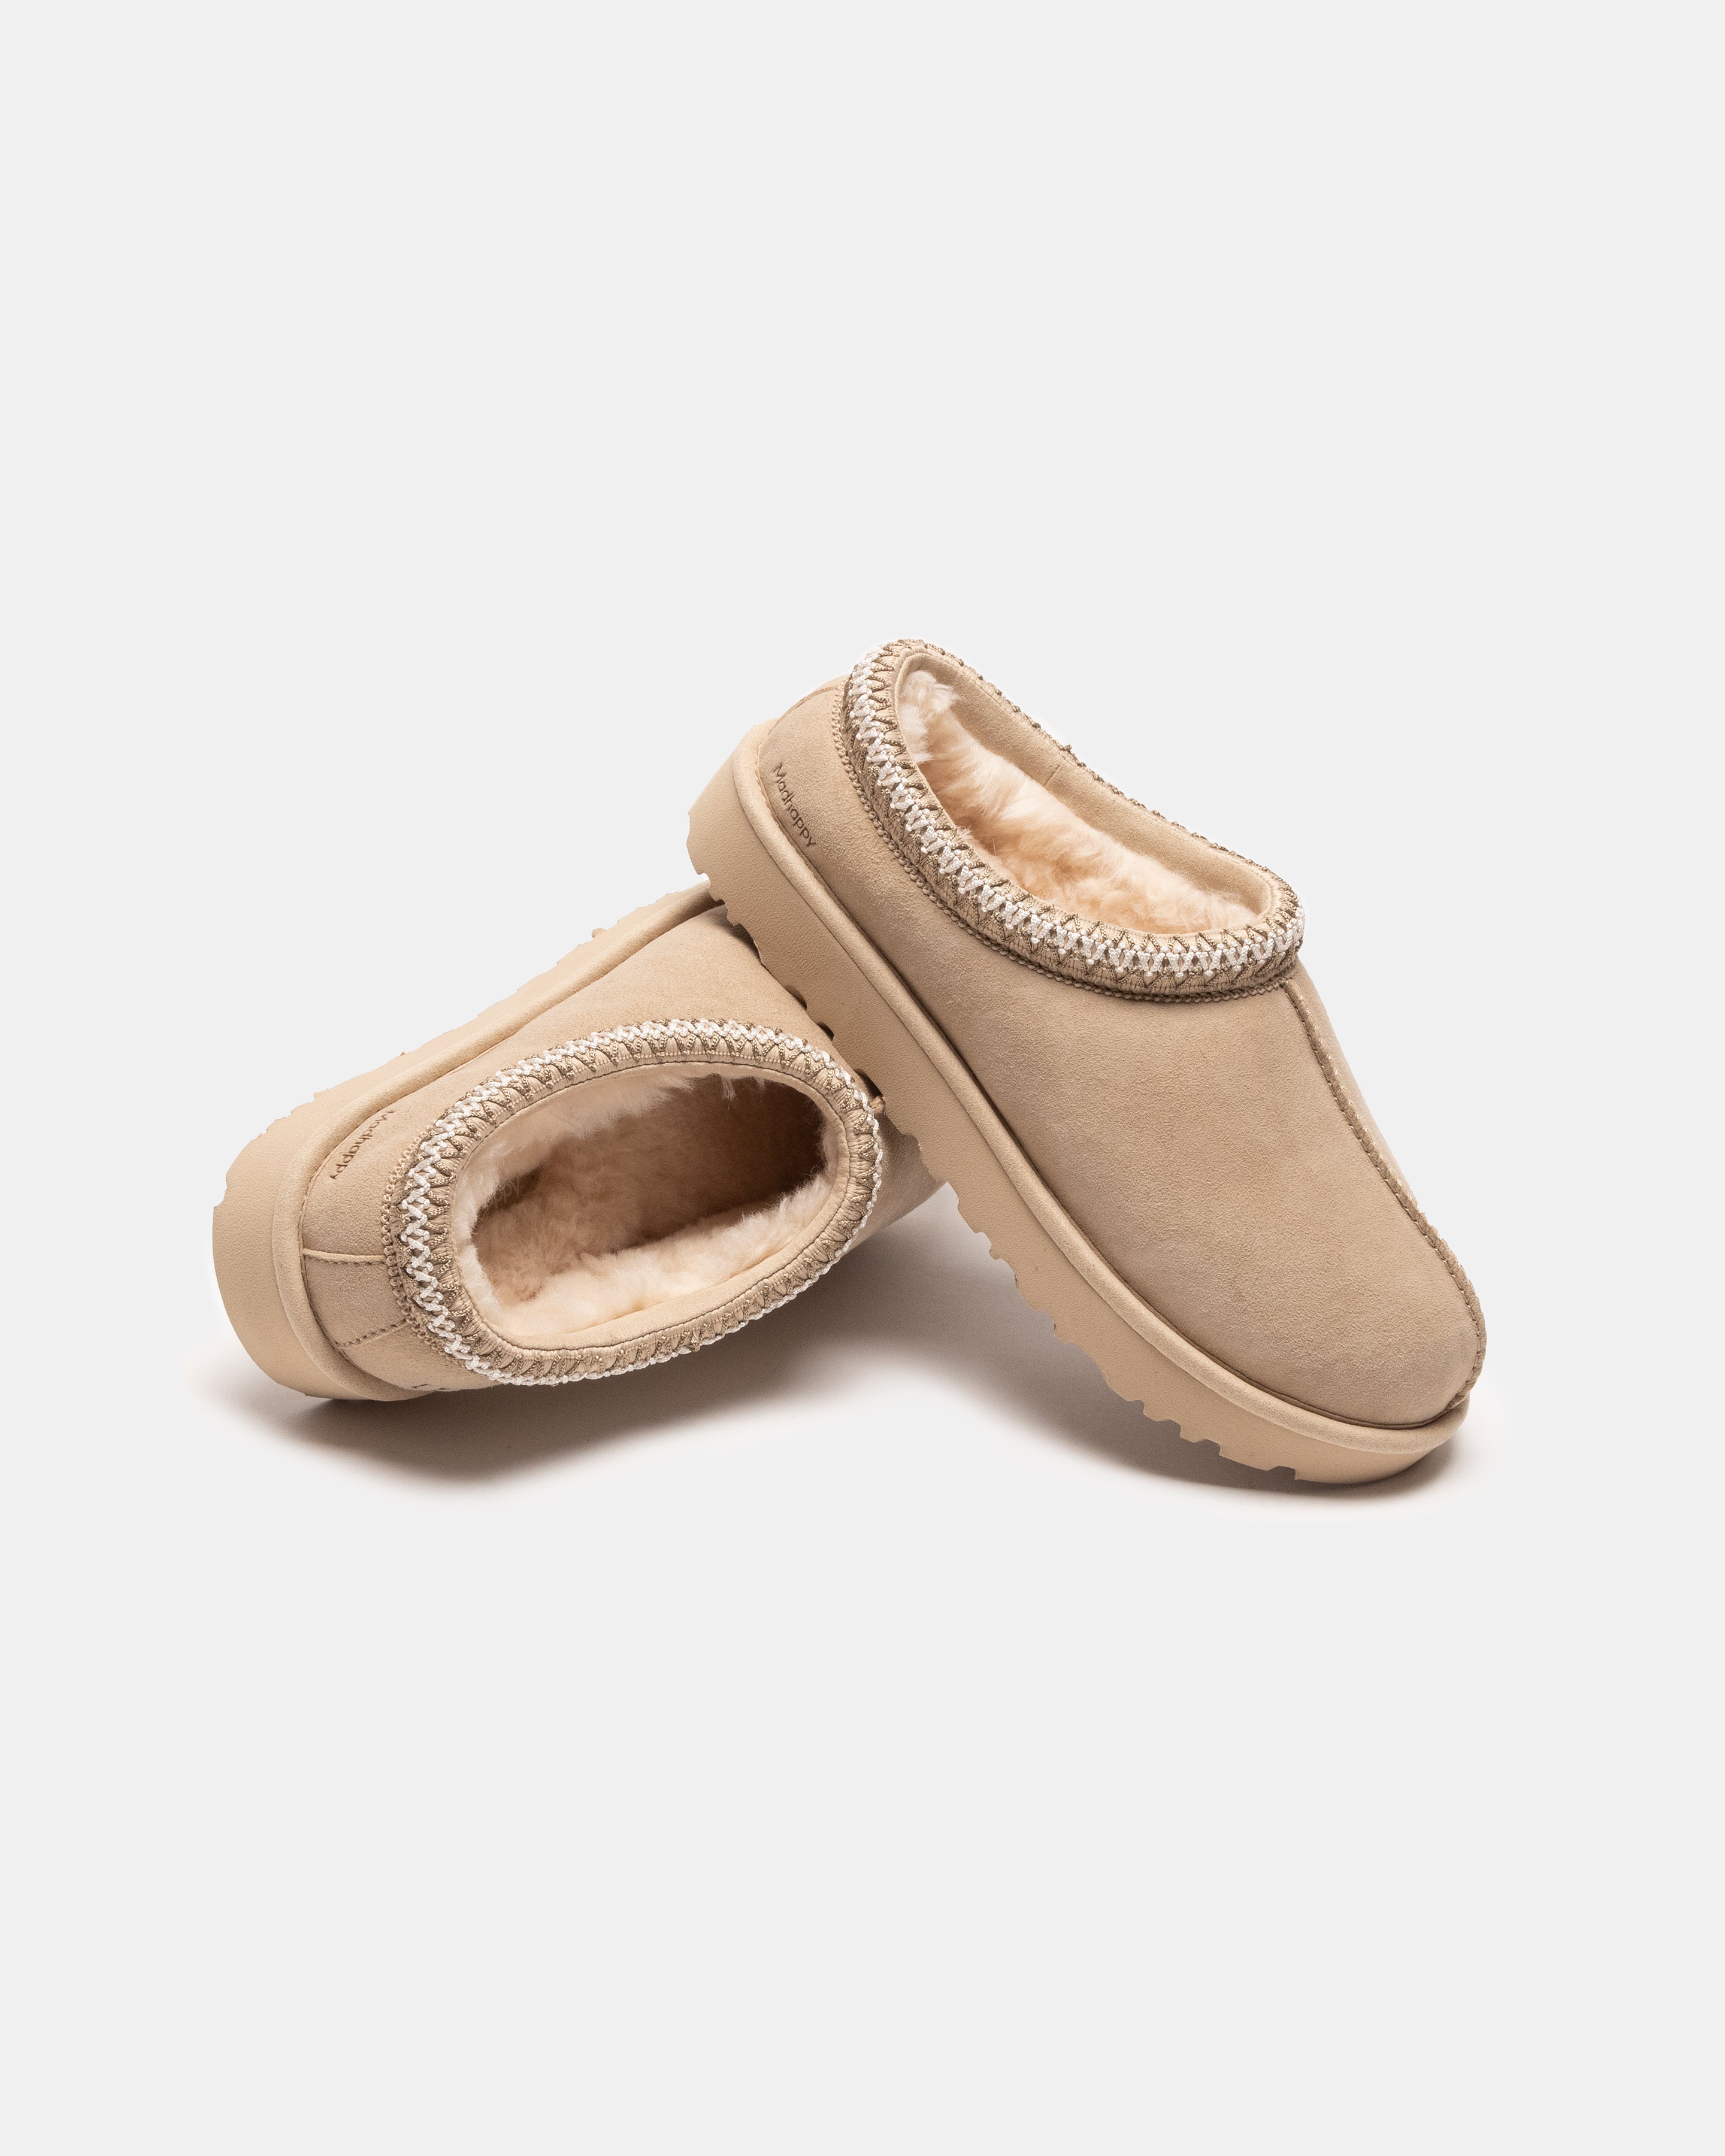 Madhappy & UGG | Official Madhappy Store